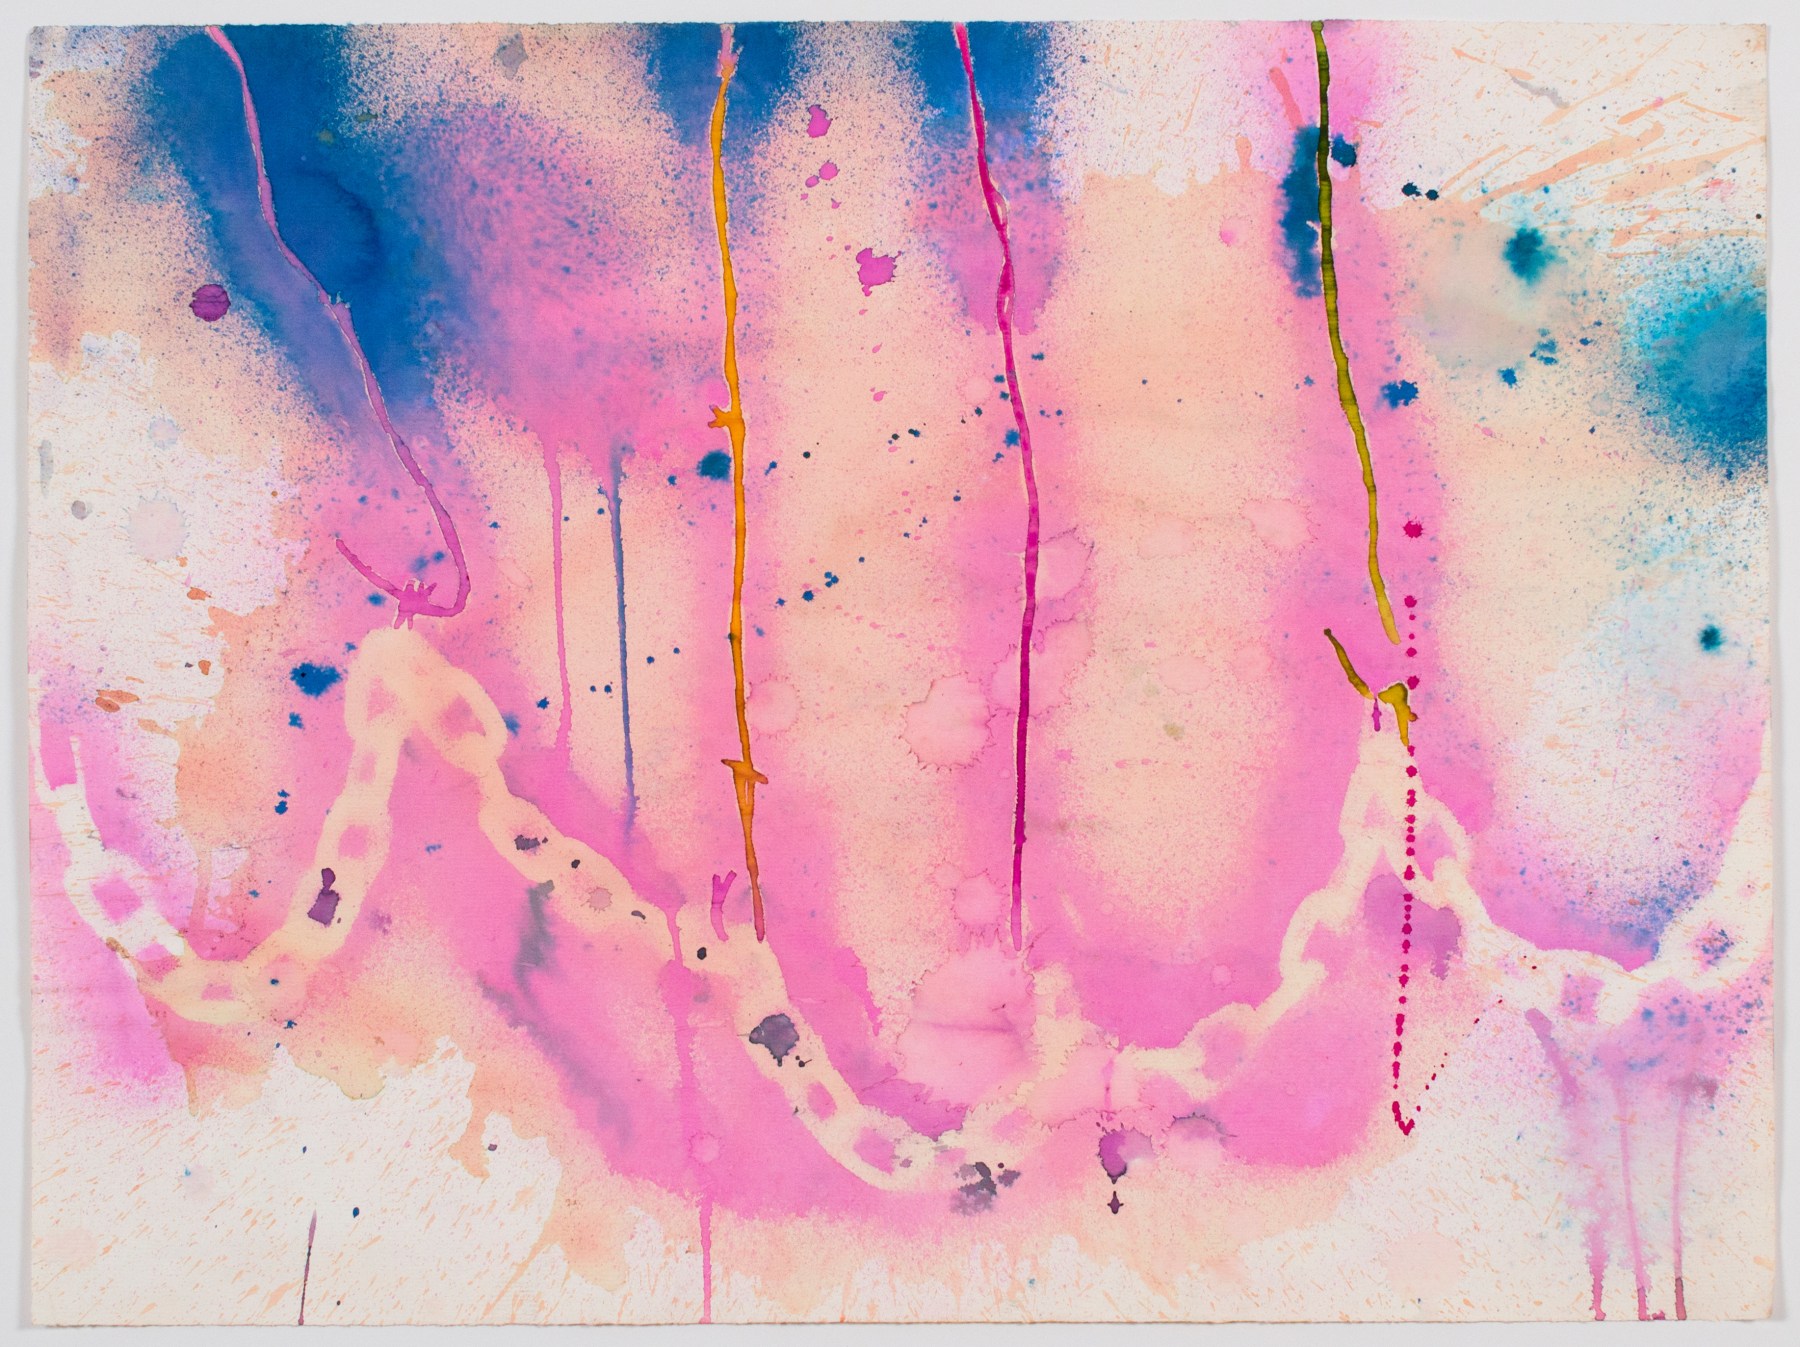 Untitled, 1974, Watercolor and ink on paper